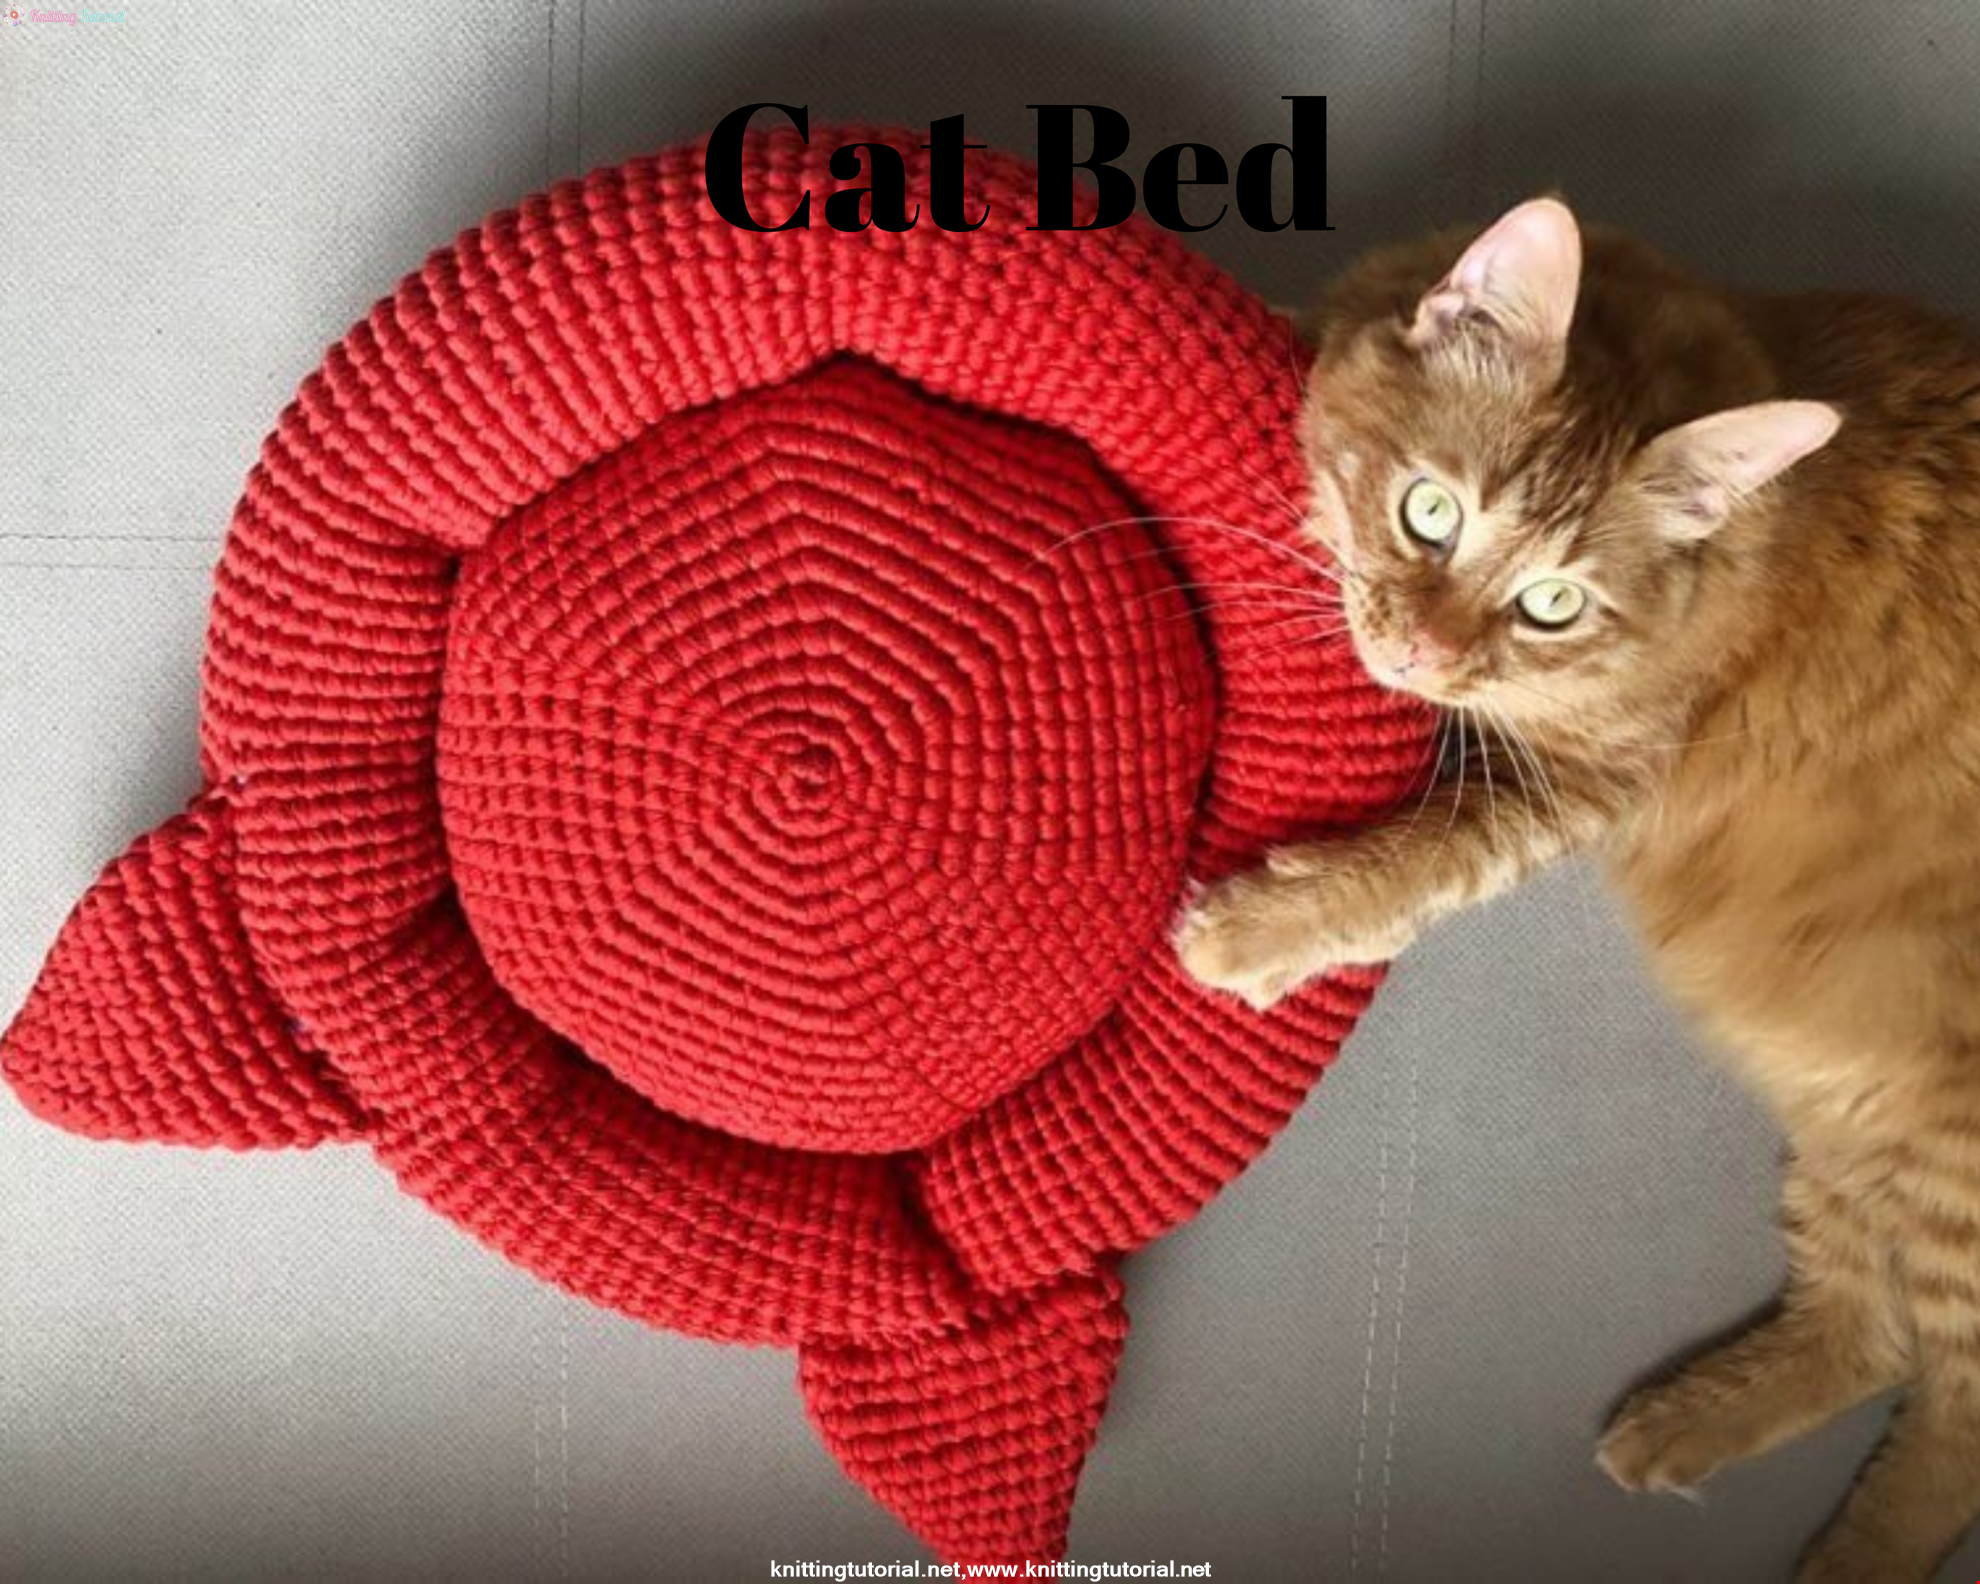 Cat Bed Making and Recipe